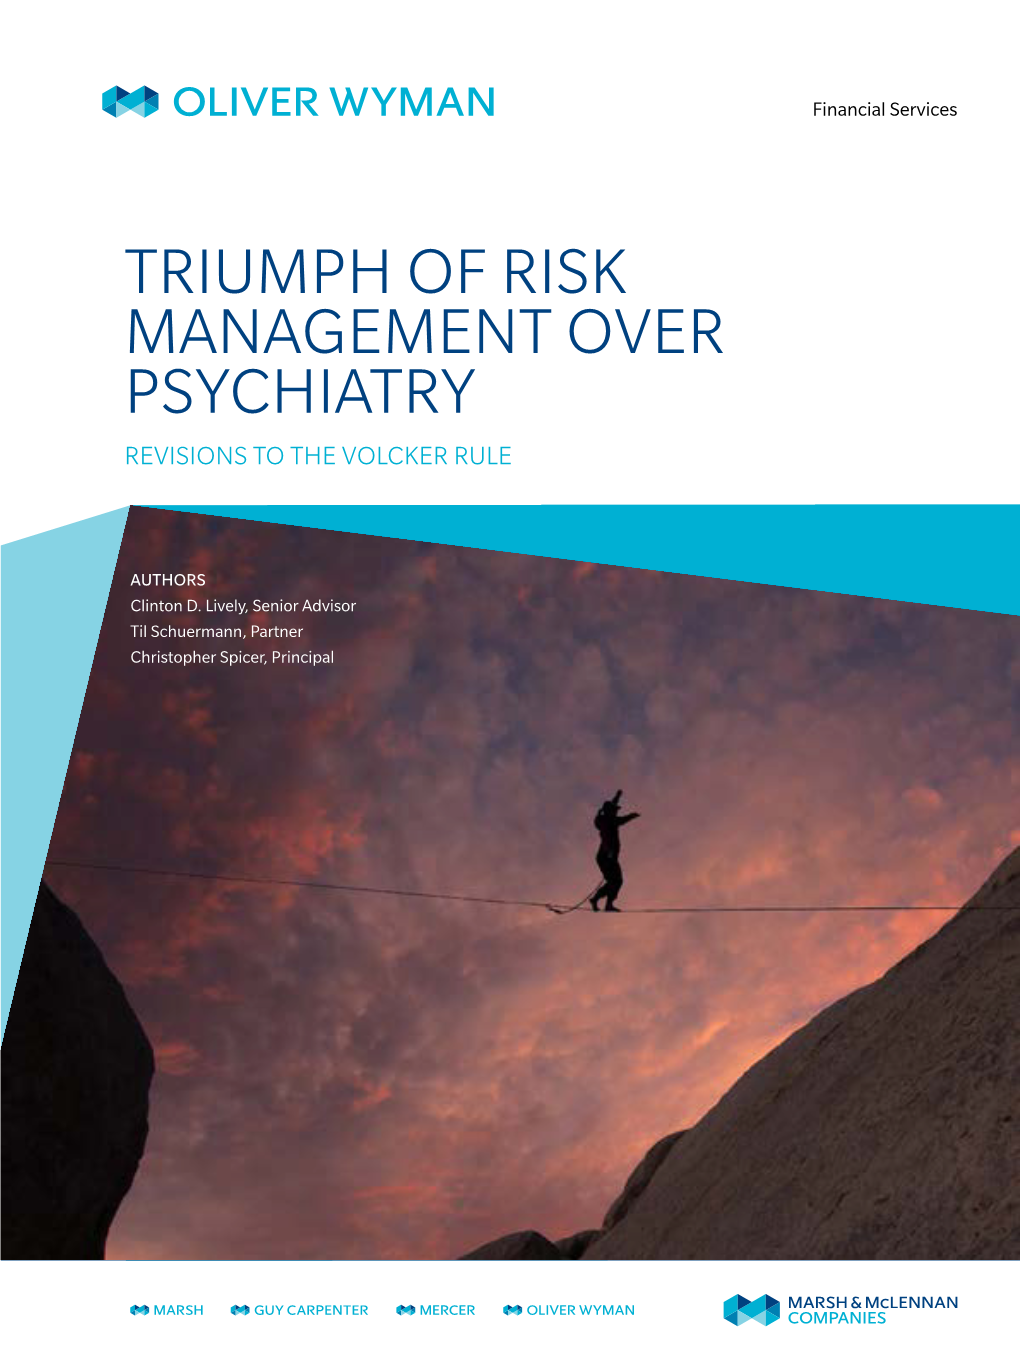 Triumph of Risk Management Over Psychiatry Revisions to the Volcker Rule